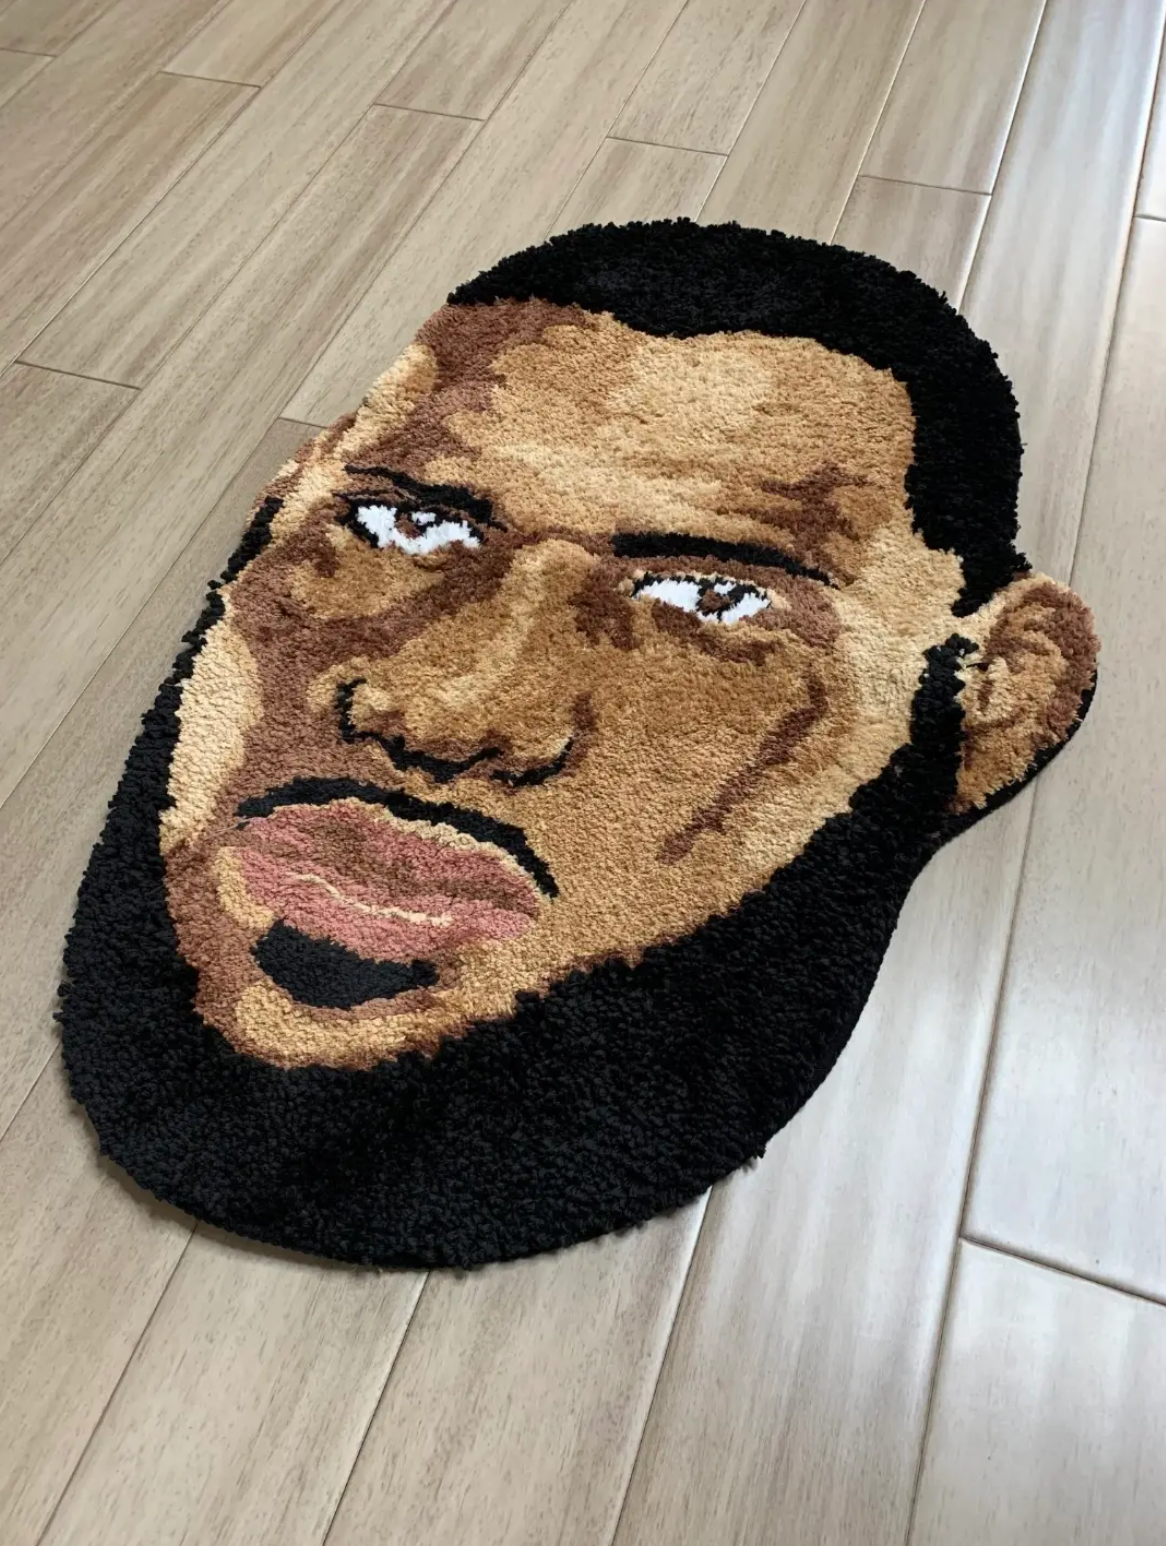 LeBron James "King's Face"  Hand-Crafted Tufting Heavy Carpet Premium (Limited to 10)